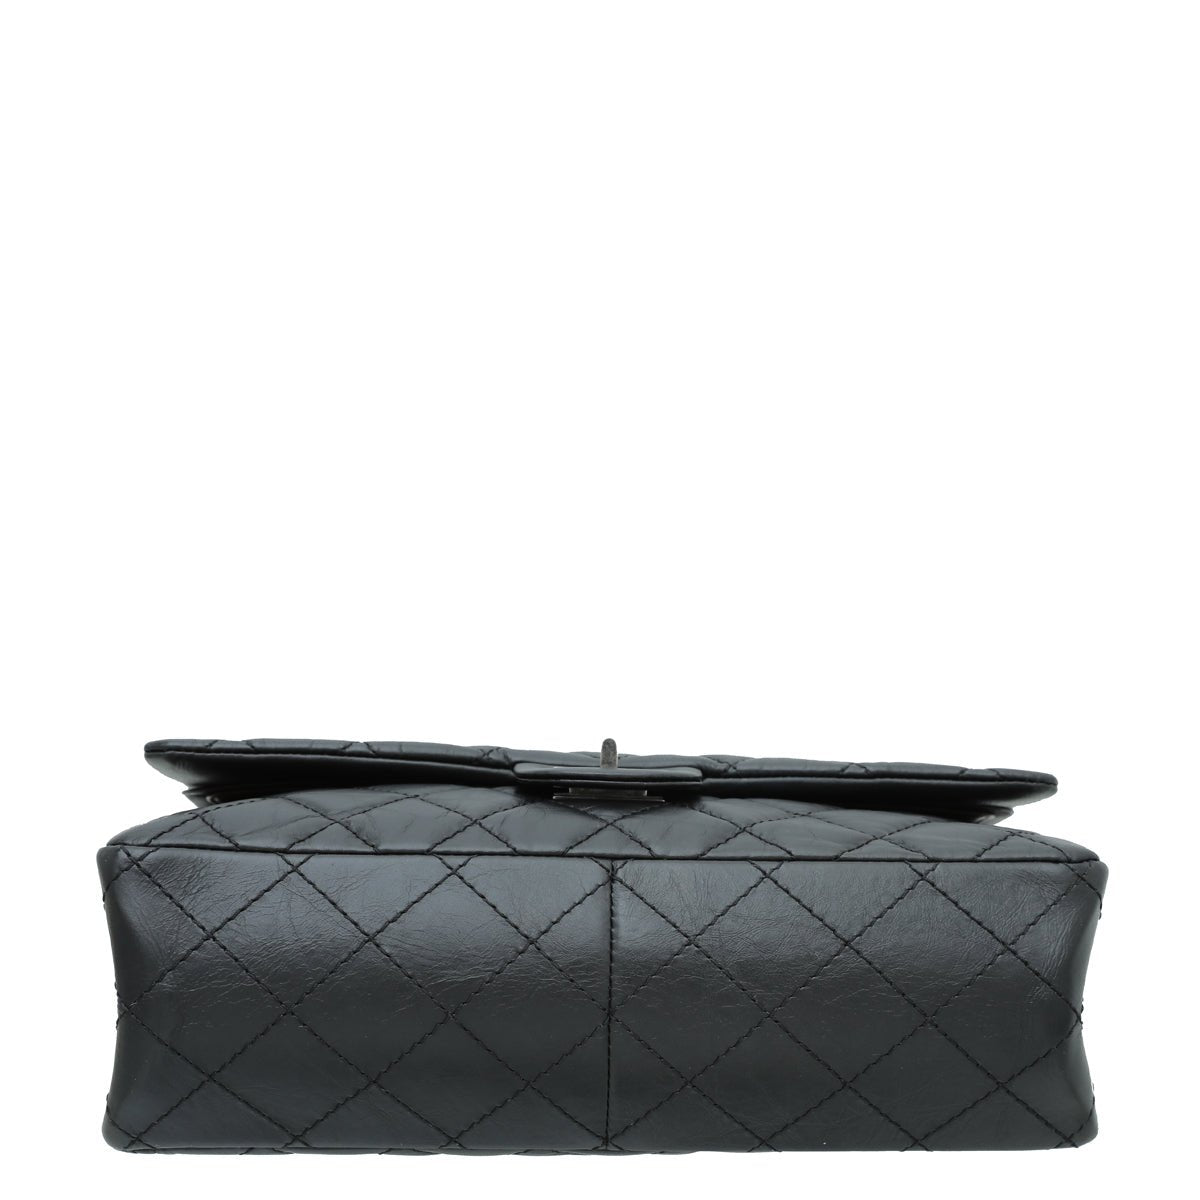 Chanel - Chanel Black 2.55 Reissue Double Flap Crumpled 225 Bag | The Closet